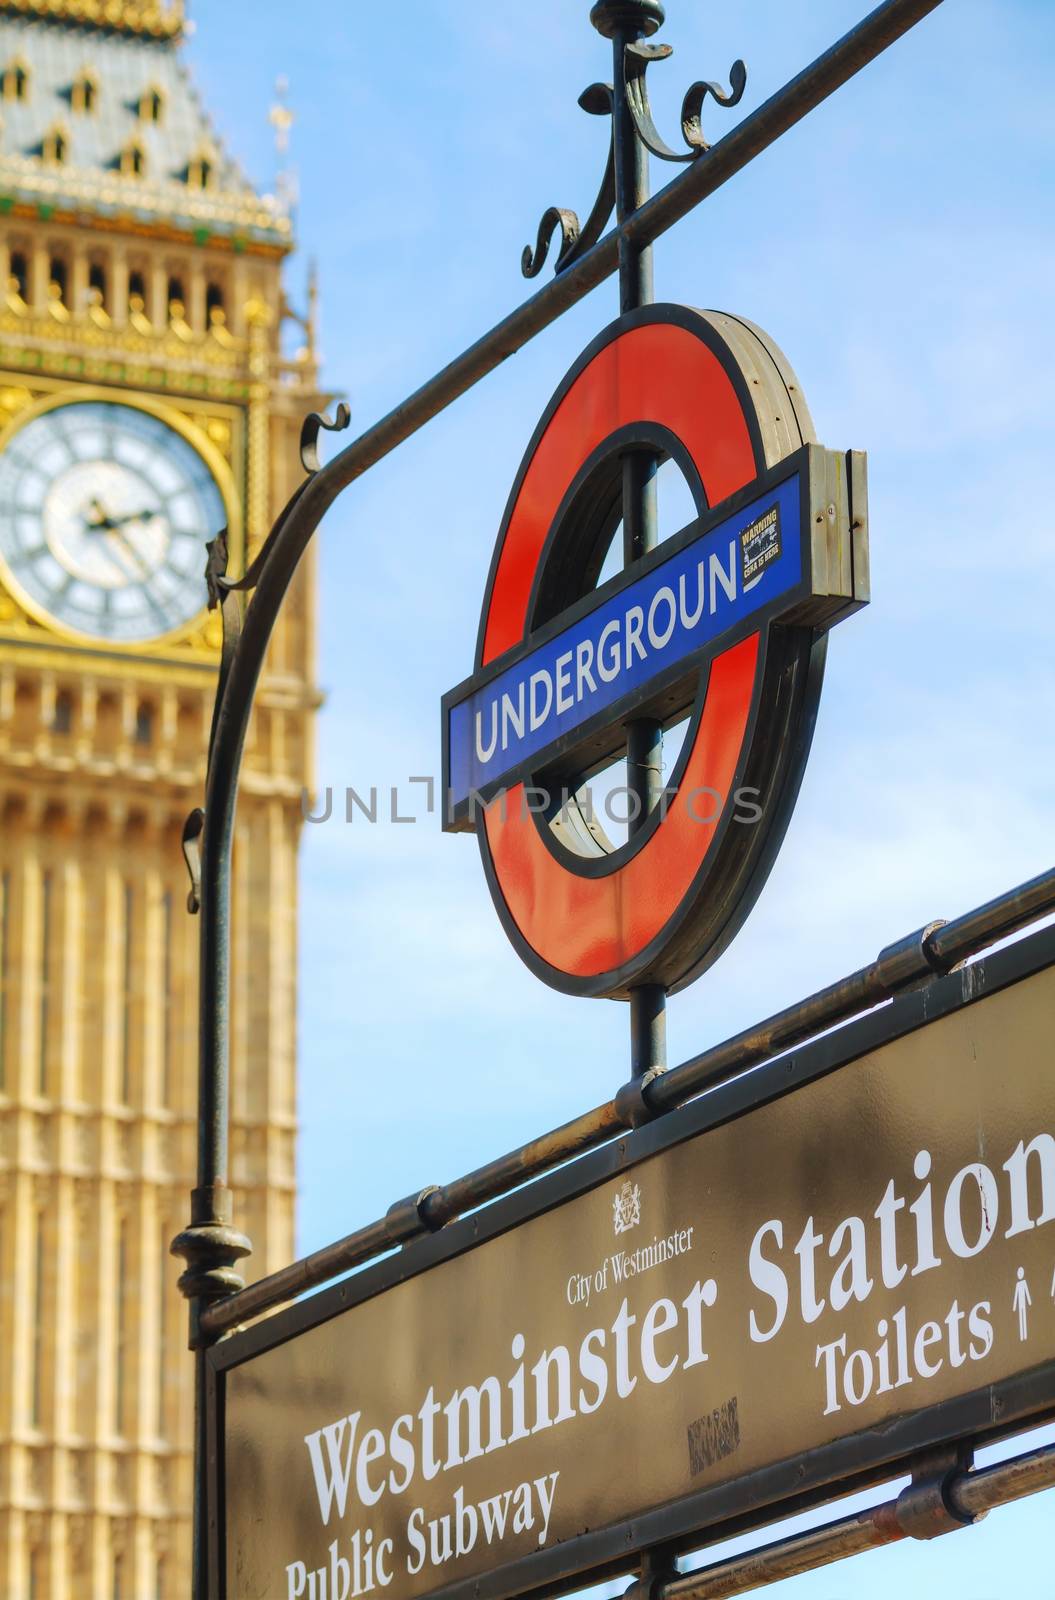 London underground station sign by AndreyKr